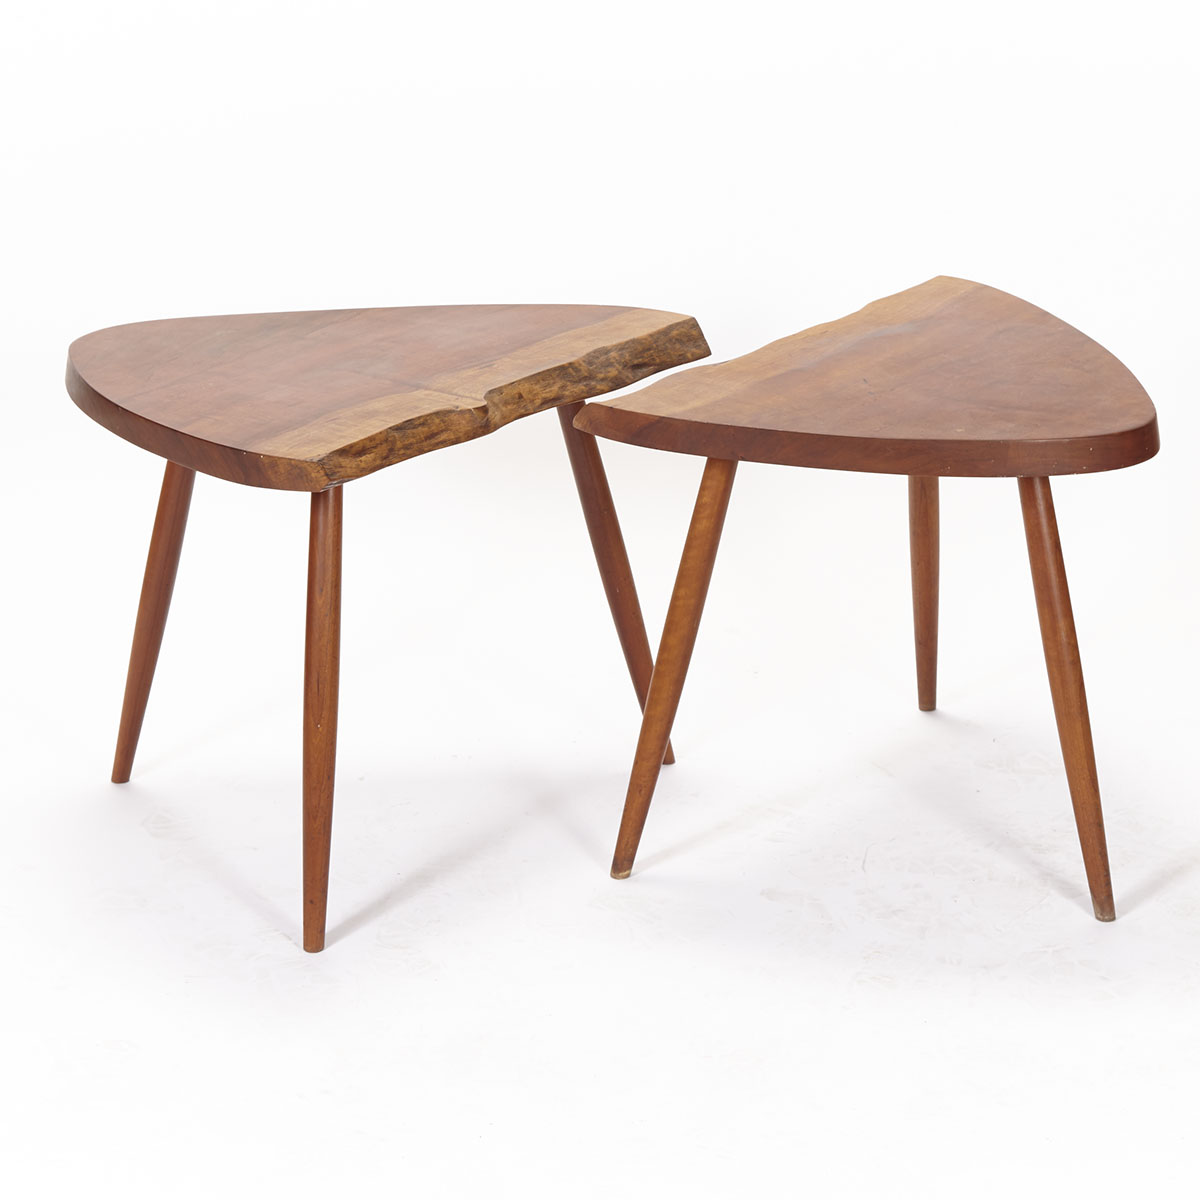 Pair of George Nakashima Free Edge Walnut and Cherry Side Tables, American, mid 20th century 